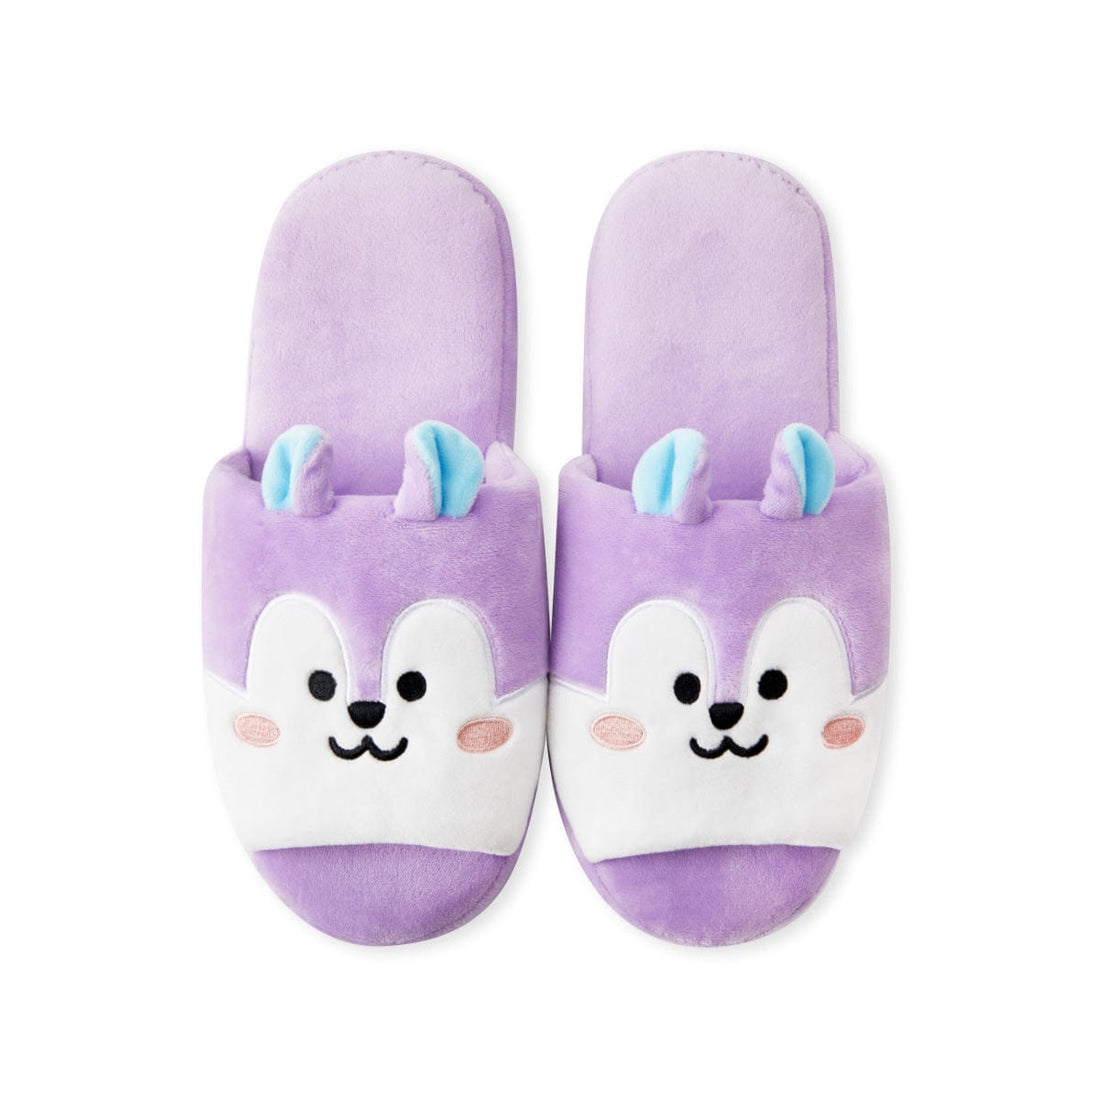 LINE FRIENDS PO FASHION NEW MANG BT21 NEW MANG HOUSE SLIPPERS